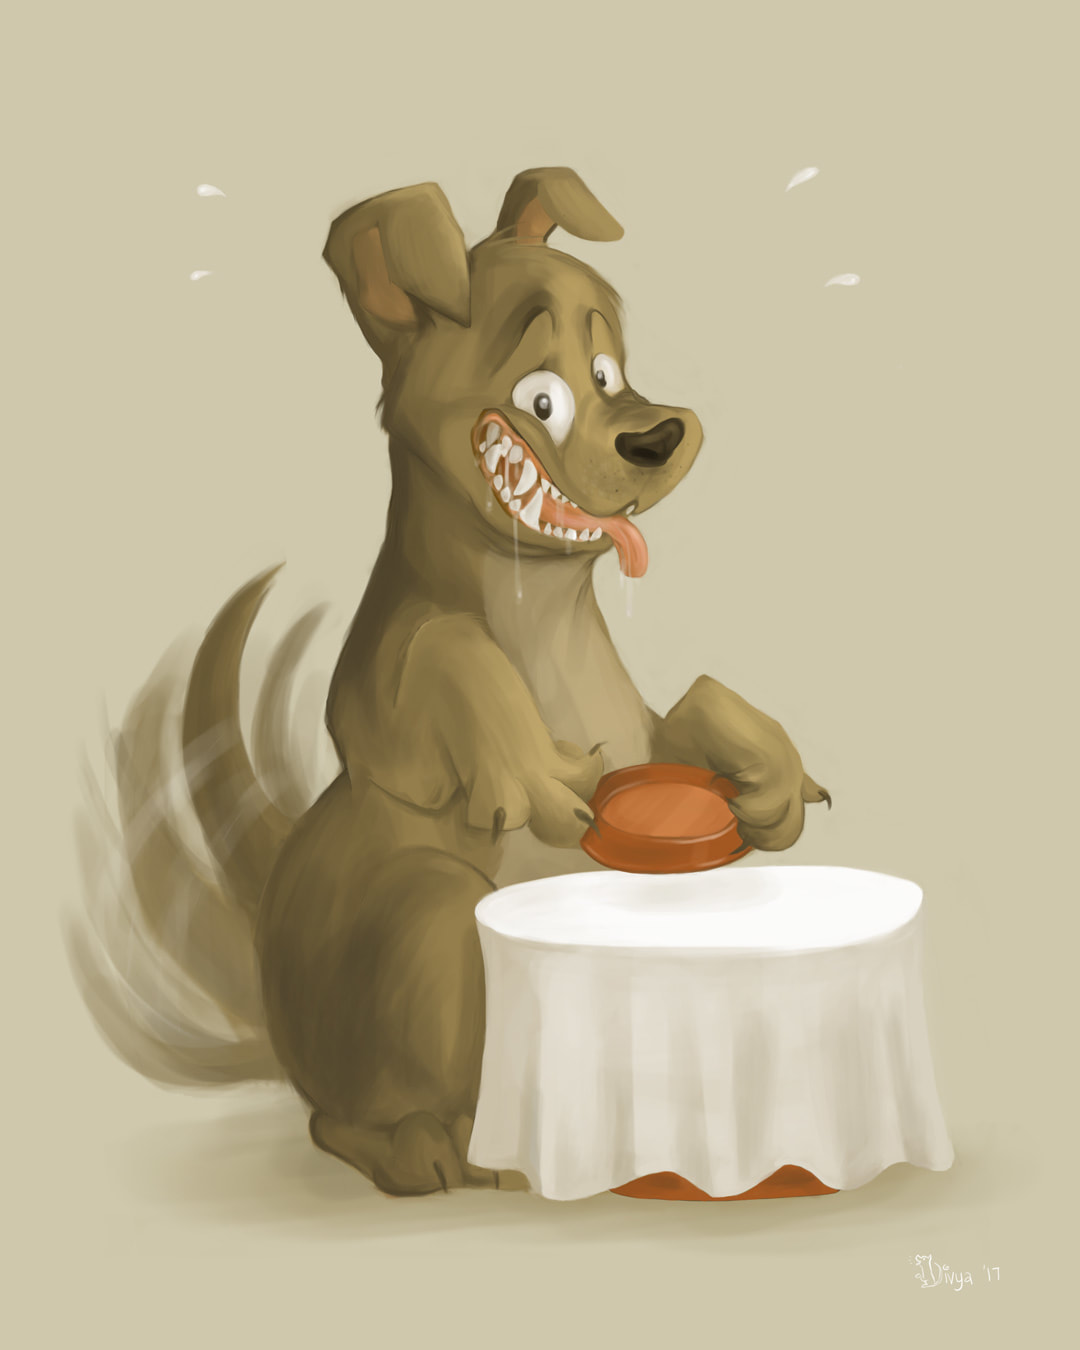 A Dog holding out its bowl salivating in a Pavlovian Response to meal time. Digital illustration by Divya George.